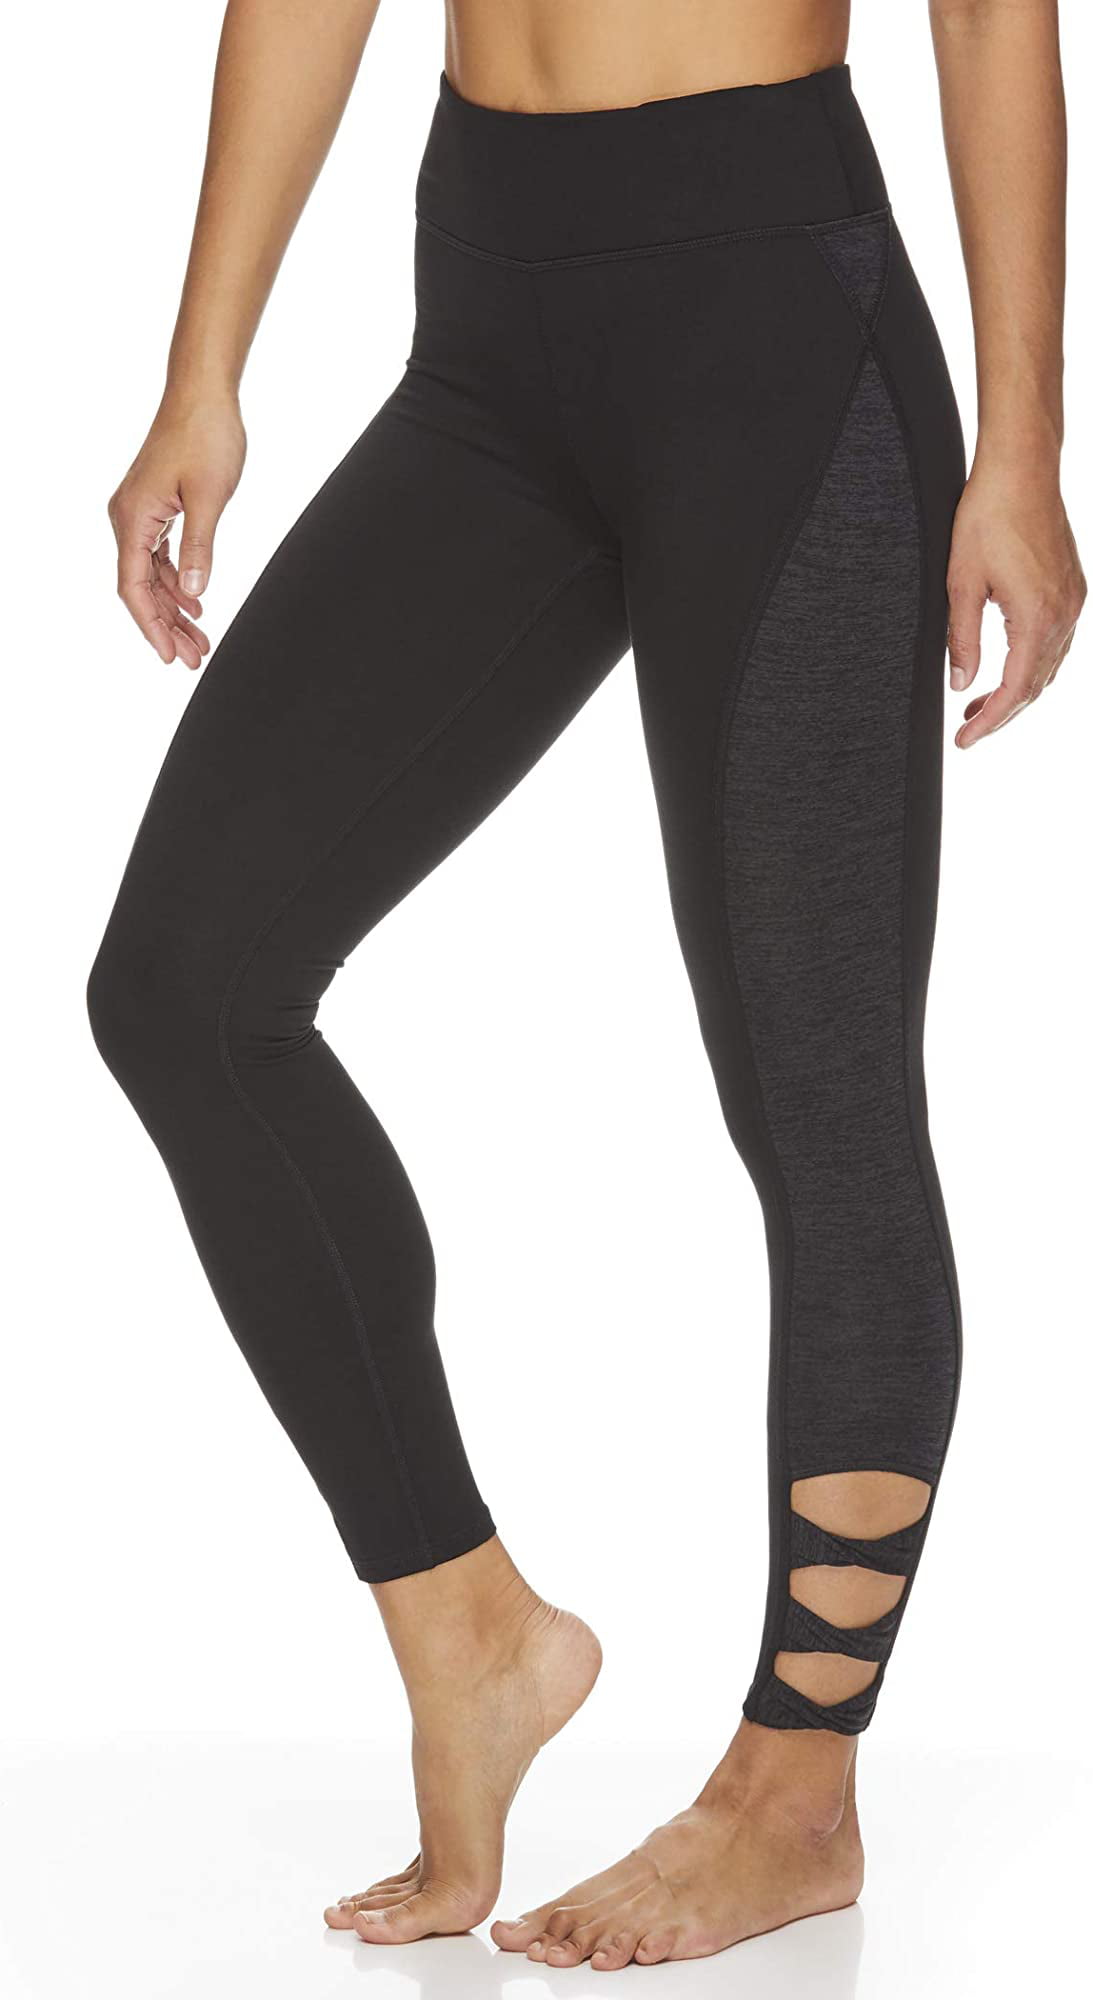 Discover more than 70 gaiam yoga pants latest - in.eteachers